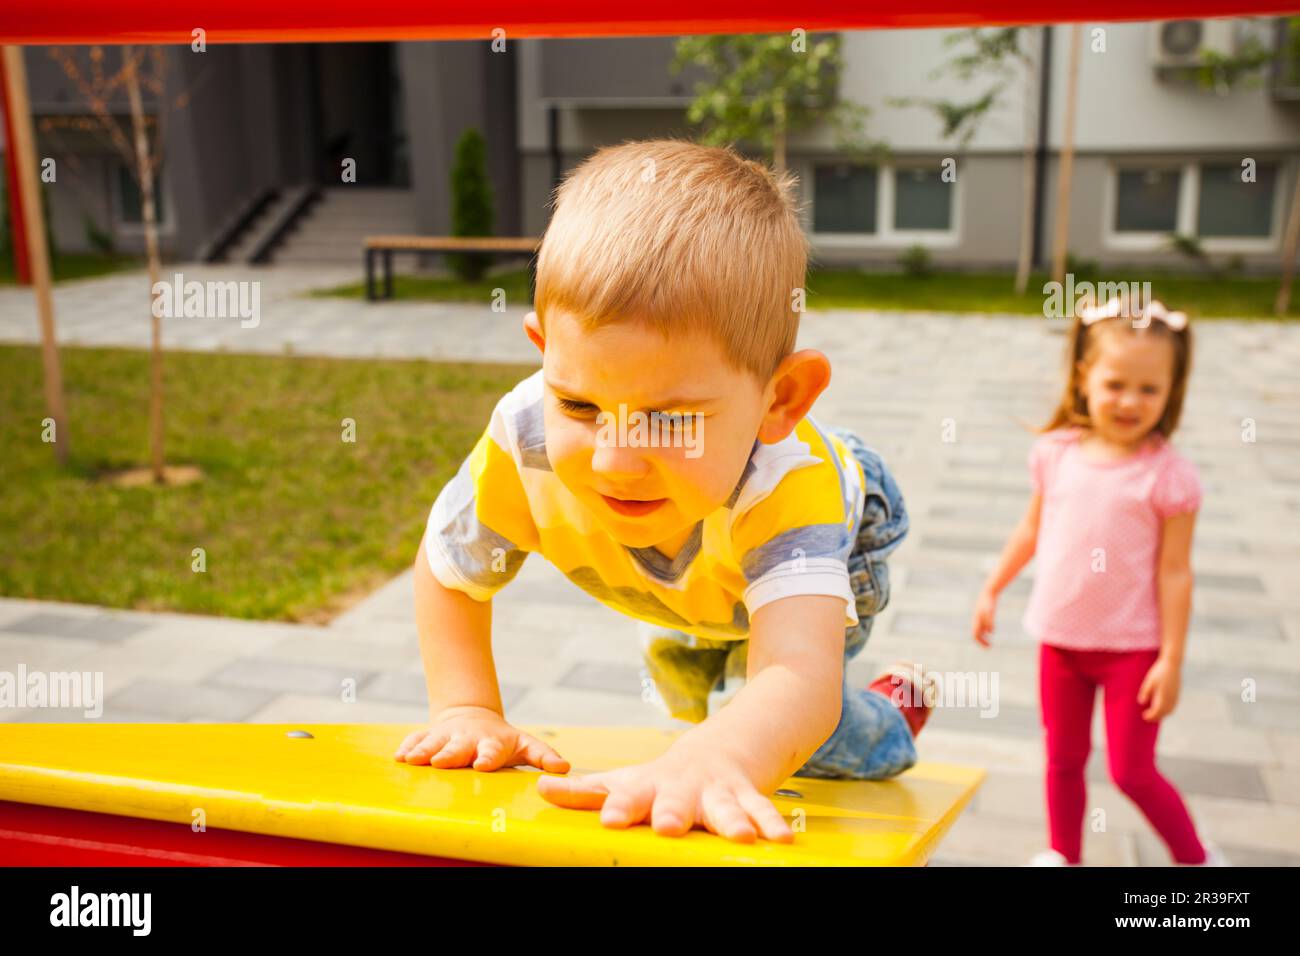 Kids playing together at modern playground outdoors Stock Photo